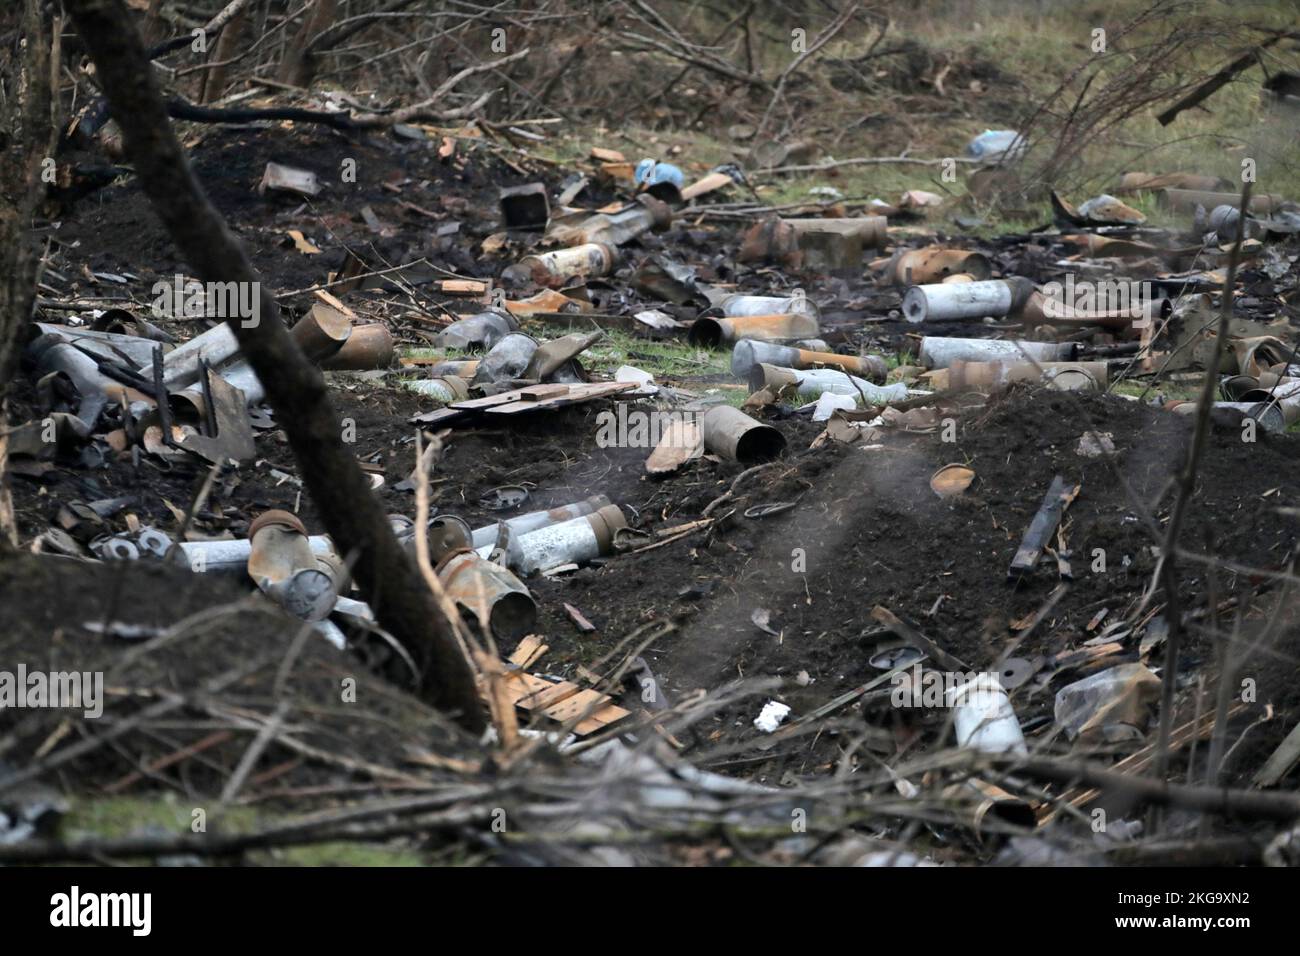 KHERSON REGION, UKRAINE - NOVEMBER 20, 2022 - Fragments of ammunition are seen near the village of Pravdino liberated from the Russian occupiers by the Ukrainian defenders, Kherson Region, southern Ukraine. Stock Photo